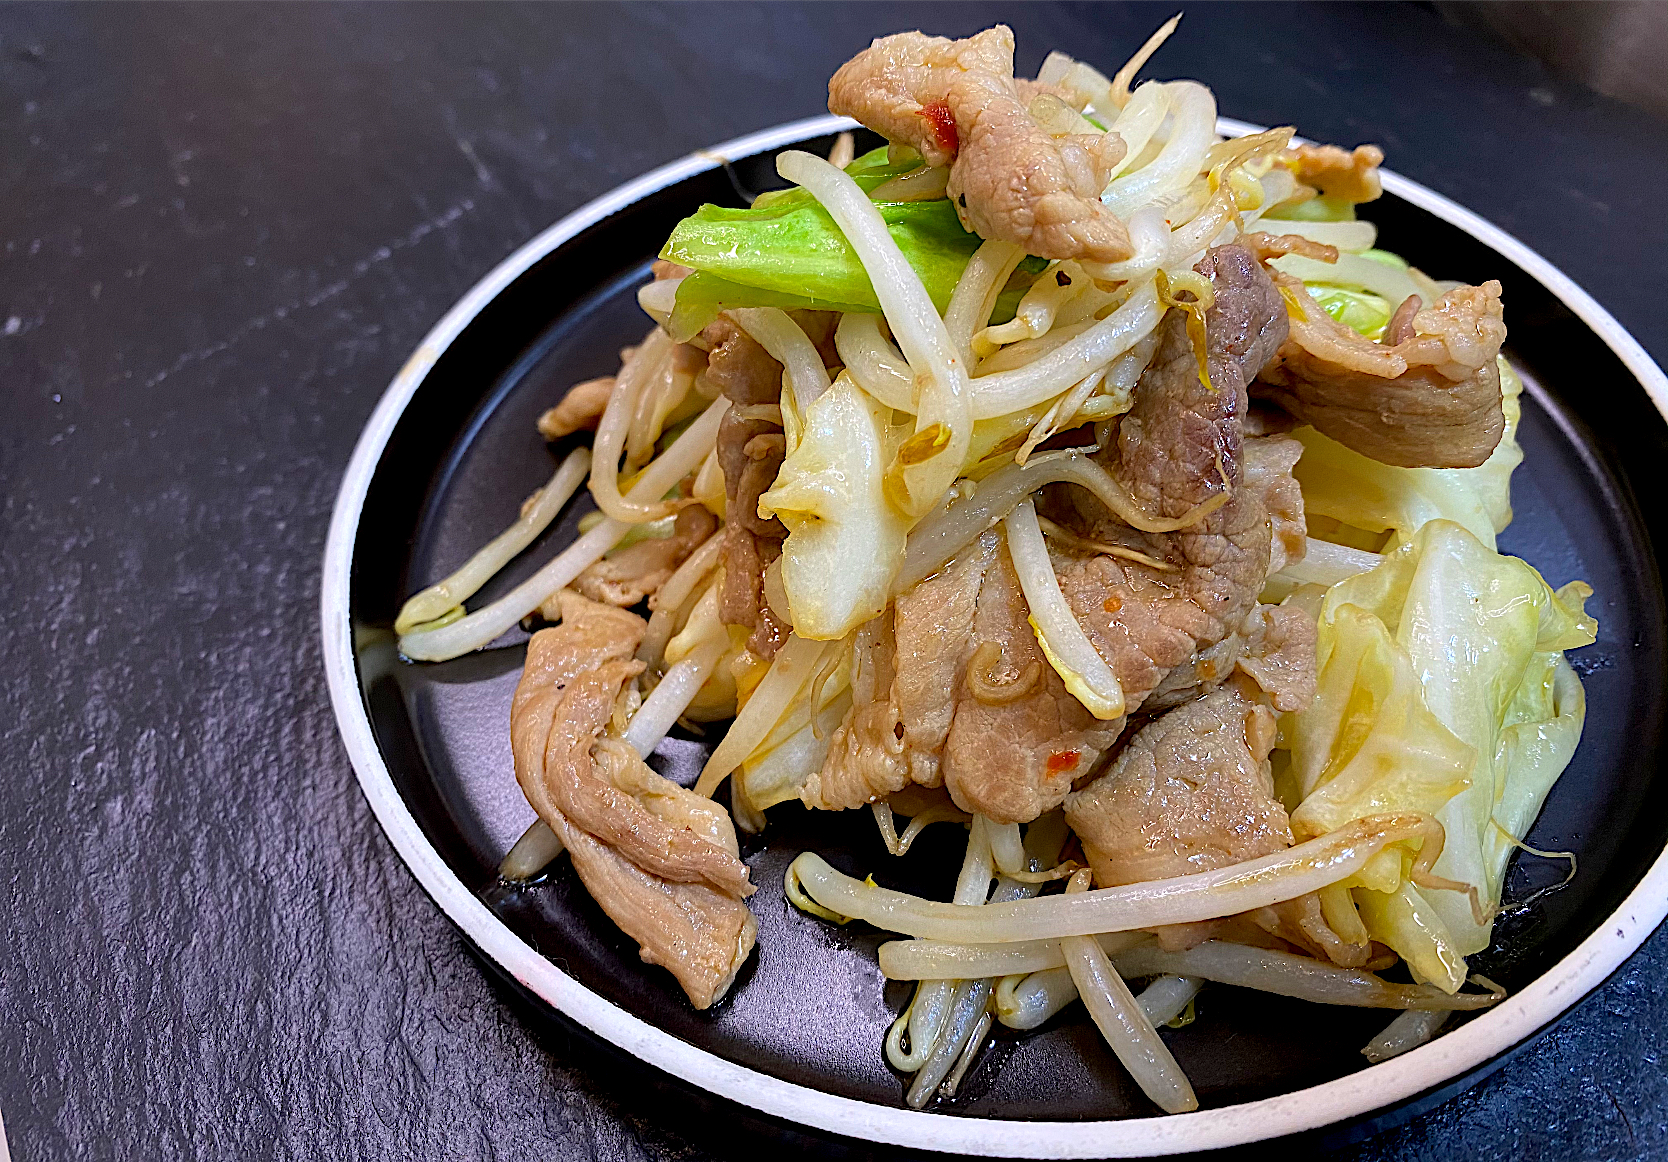 Pork and bean sprout